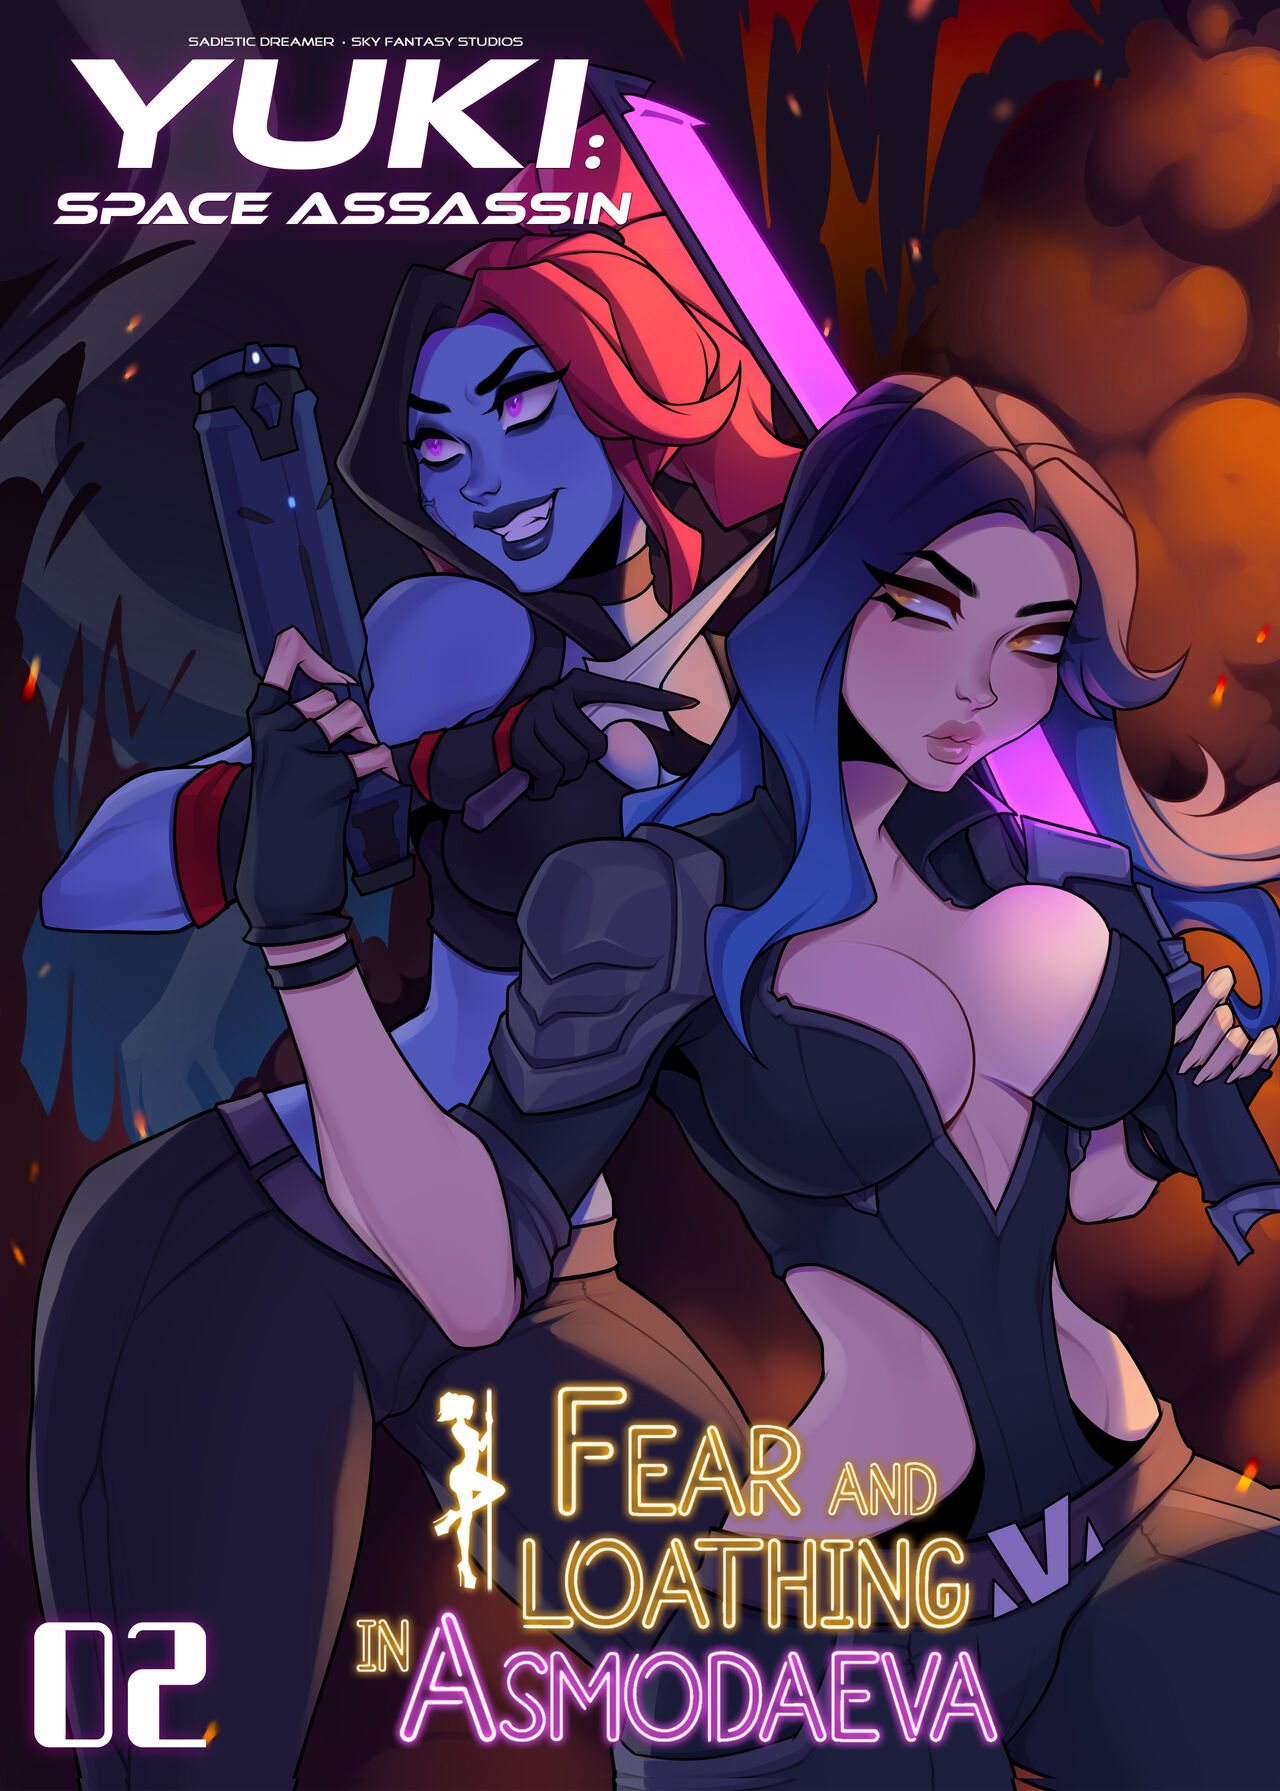 Anime Fear Porn - Yuki: Fear and Loathing in Asmodaeva, Issue #2 (Yuki: Space Assassin)  [SkyFantasy] [Cover by @Satanya69] - FreeAdultComix